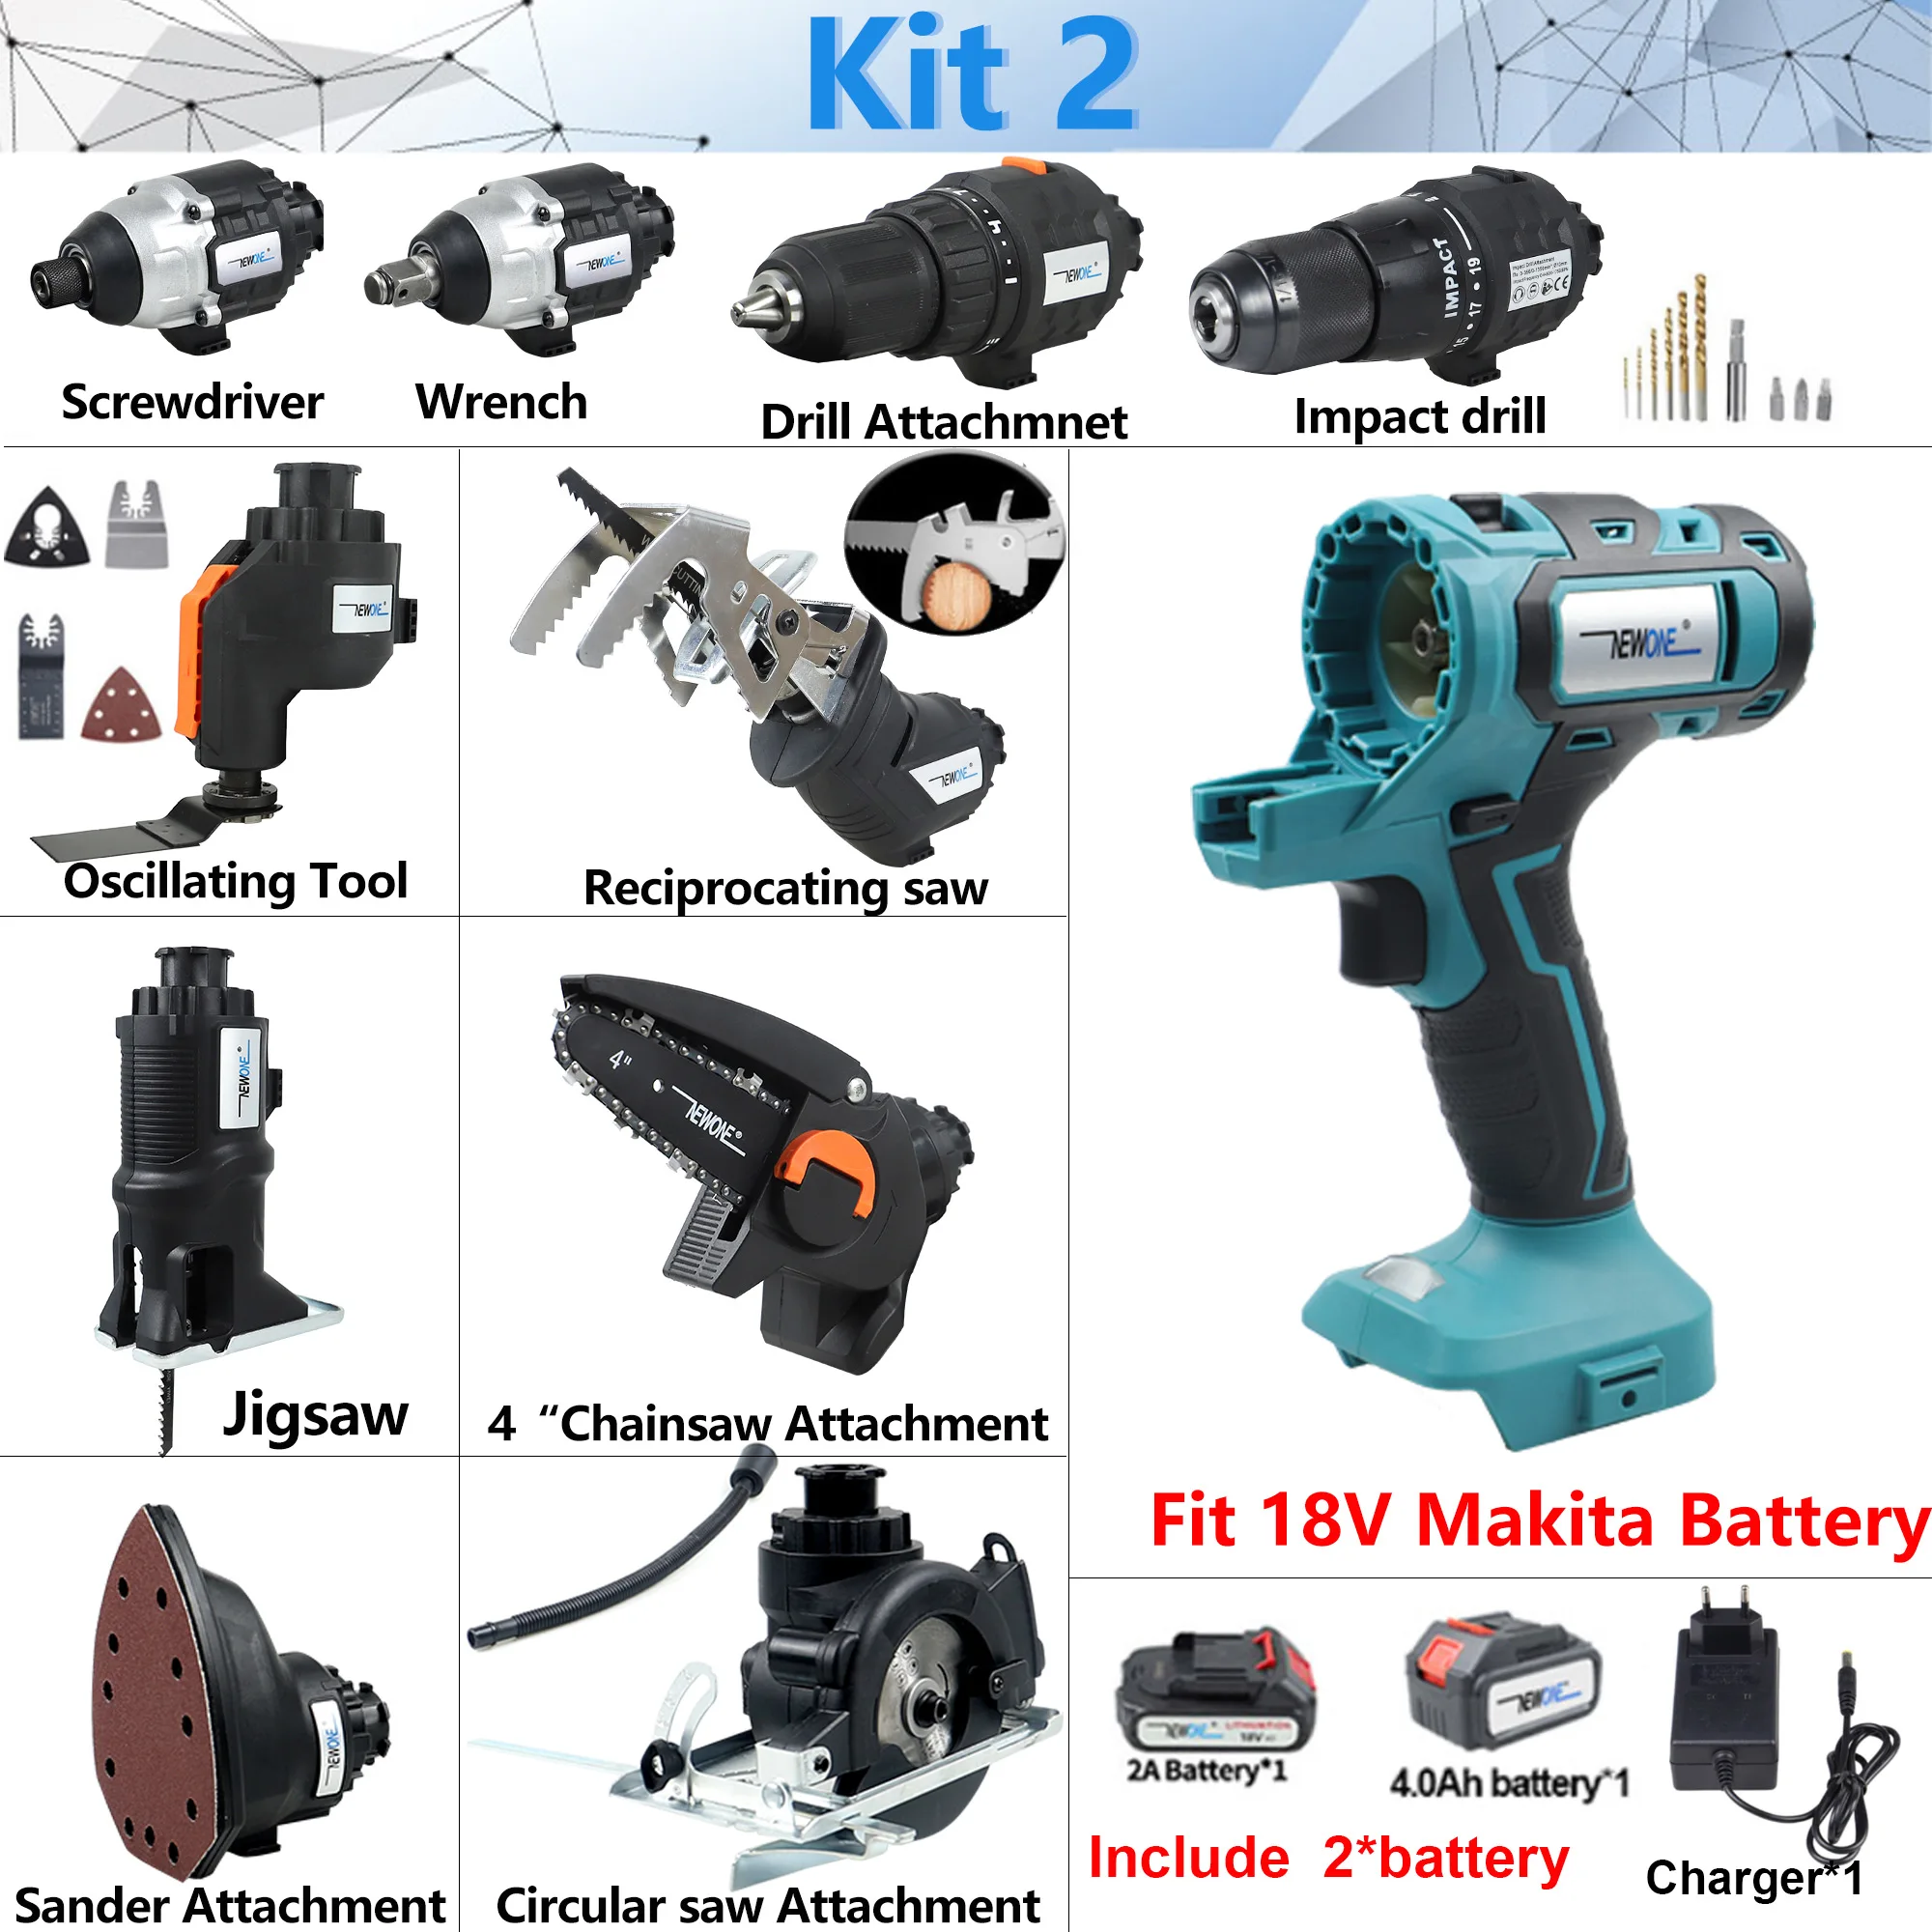 https://ae01.alicdn.com/kf/Sf061aba45e8d415a866fd4033730dc99o/10-in-1-Brushed-multifunctional-tools-Power-Tools-Set-Chainsaw-Multitool-Electric-Screwdriver-Electric-Drill-DIY.jpg